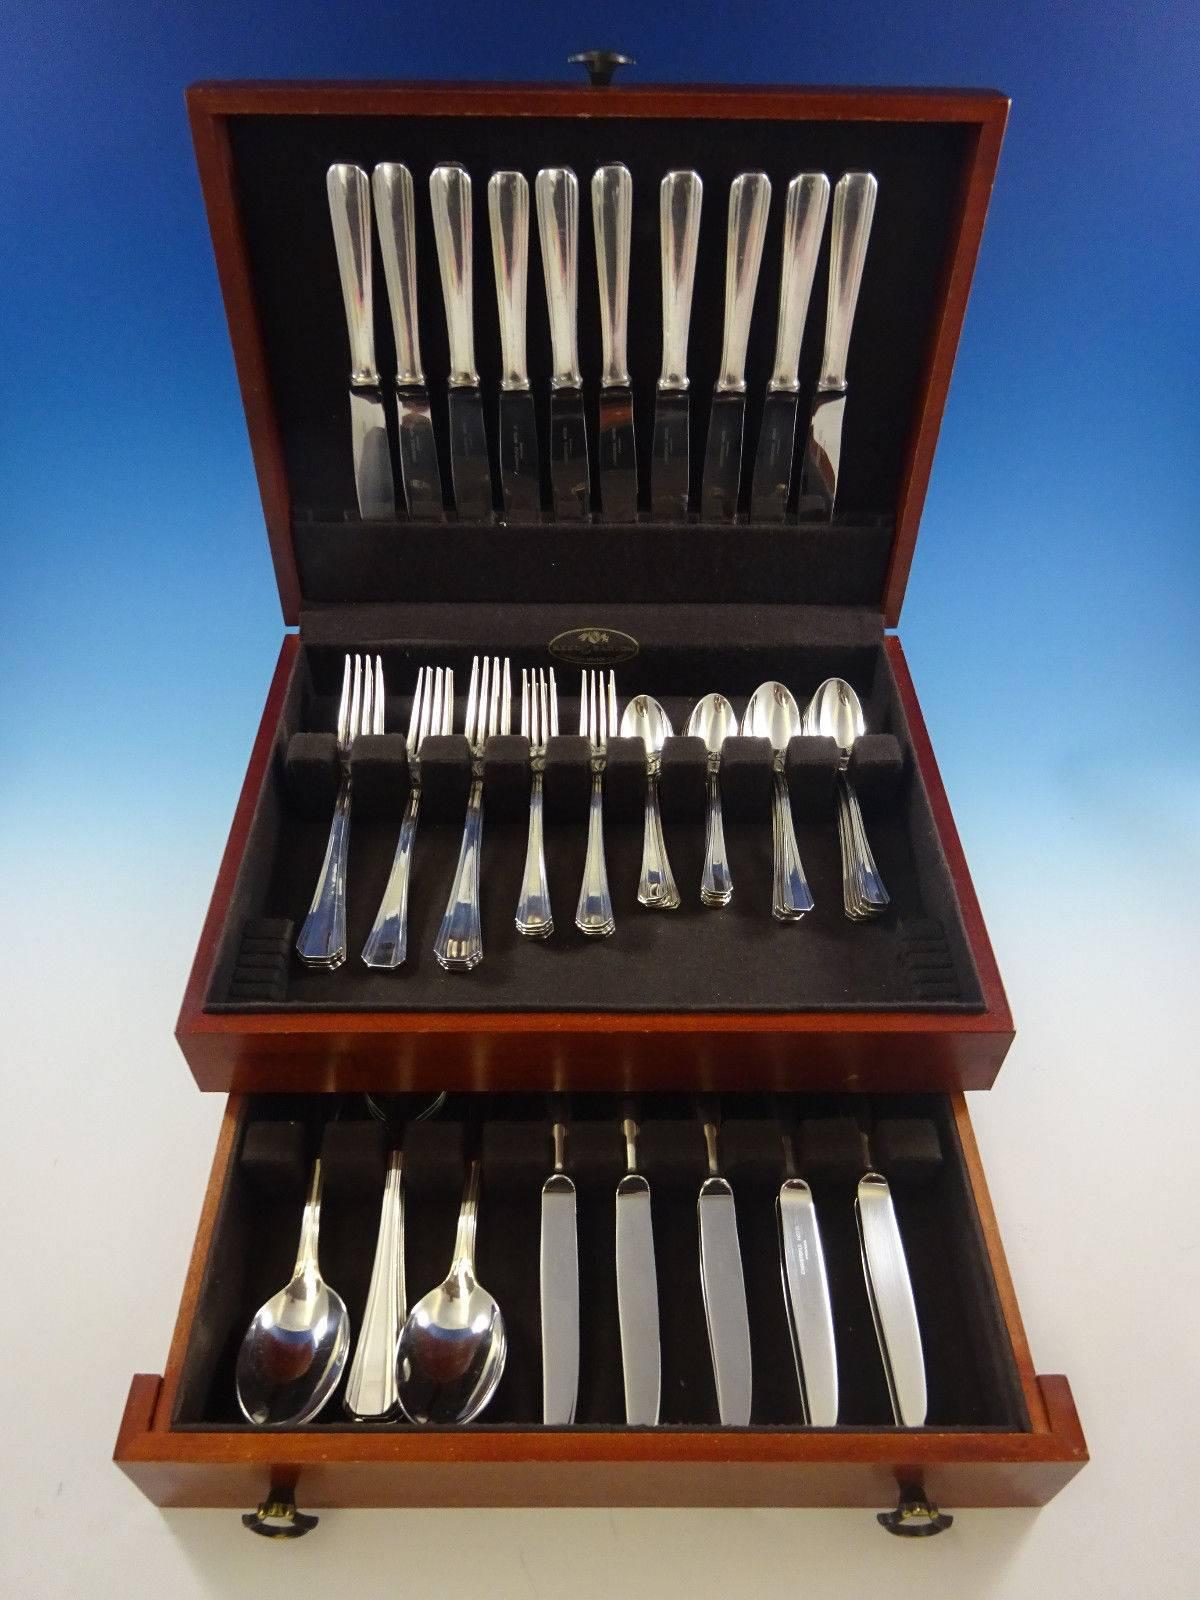 Palme (hotelware) by Christofle France silver plate dinner size flatware set of 70 pieces.

This set includes:
 
 
Ten dinner knives, 9 7/8